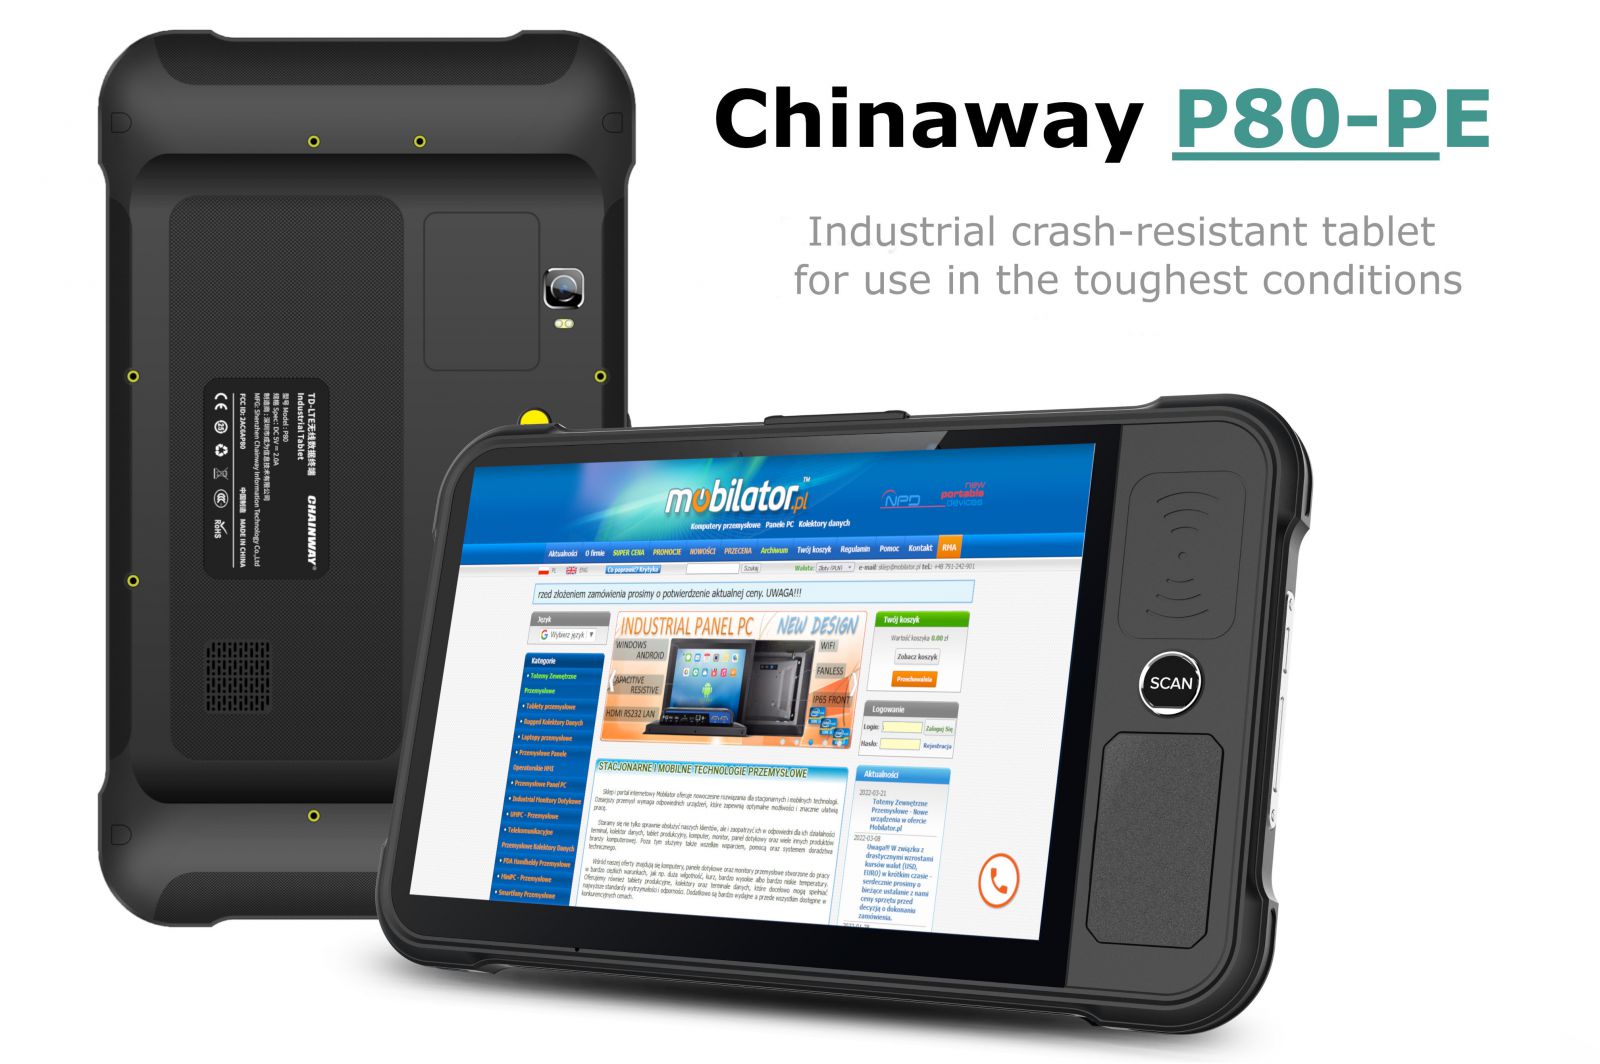 Chain-P80-PE v. 3- multi-purpose industrial tablet with backside scanner UHF RFID with 15 meter scan range